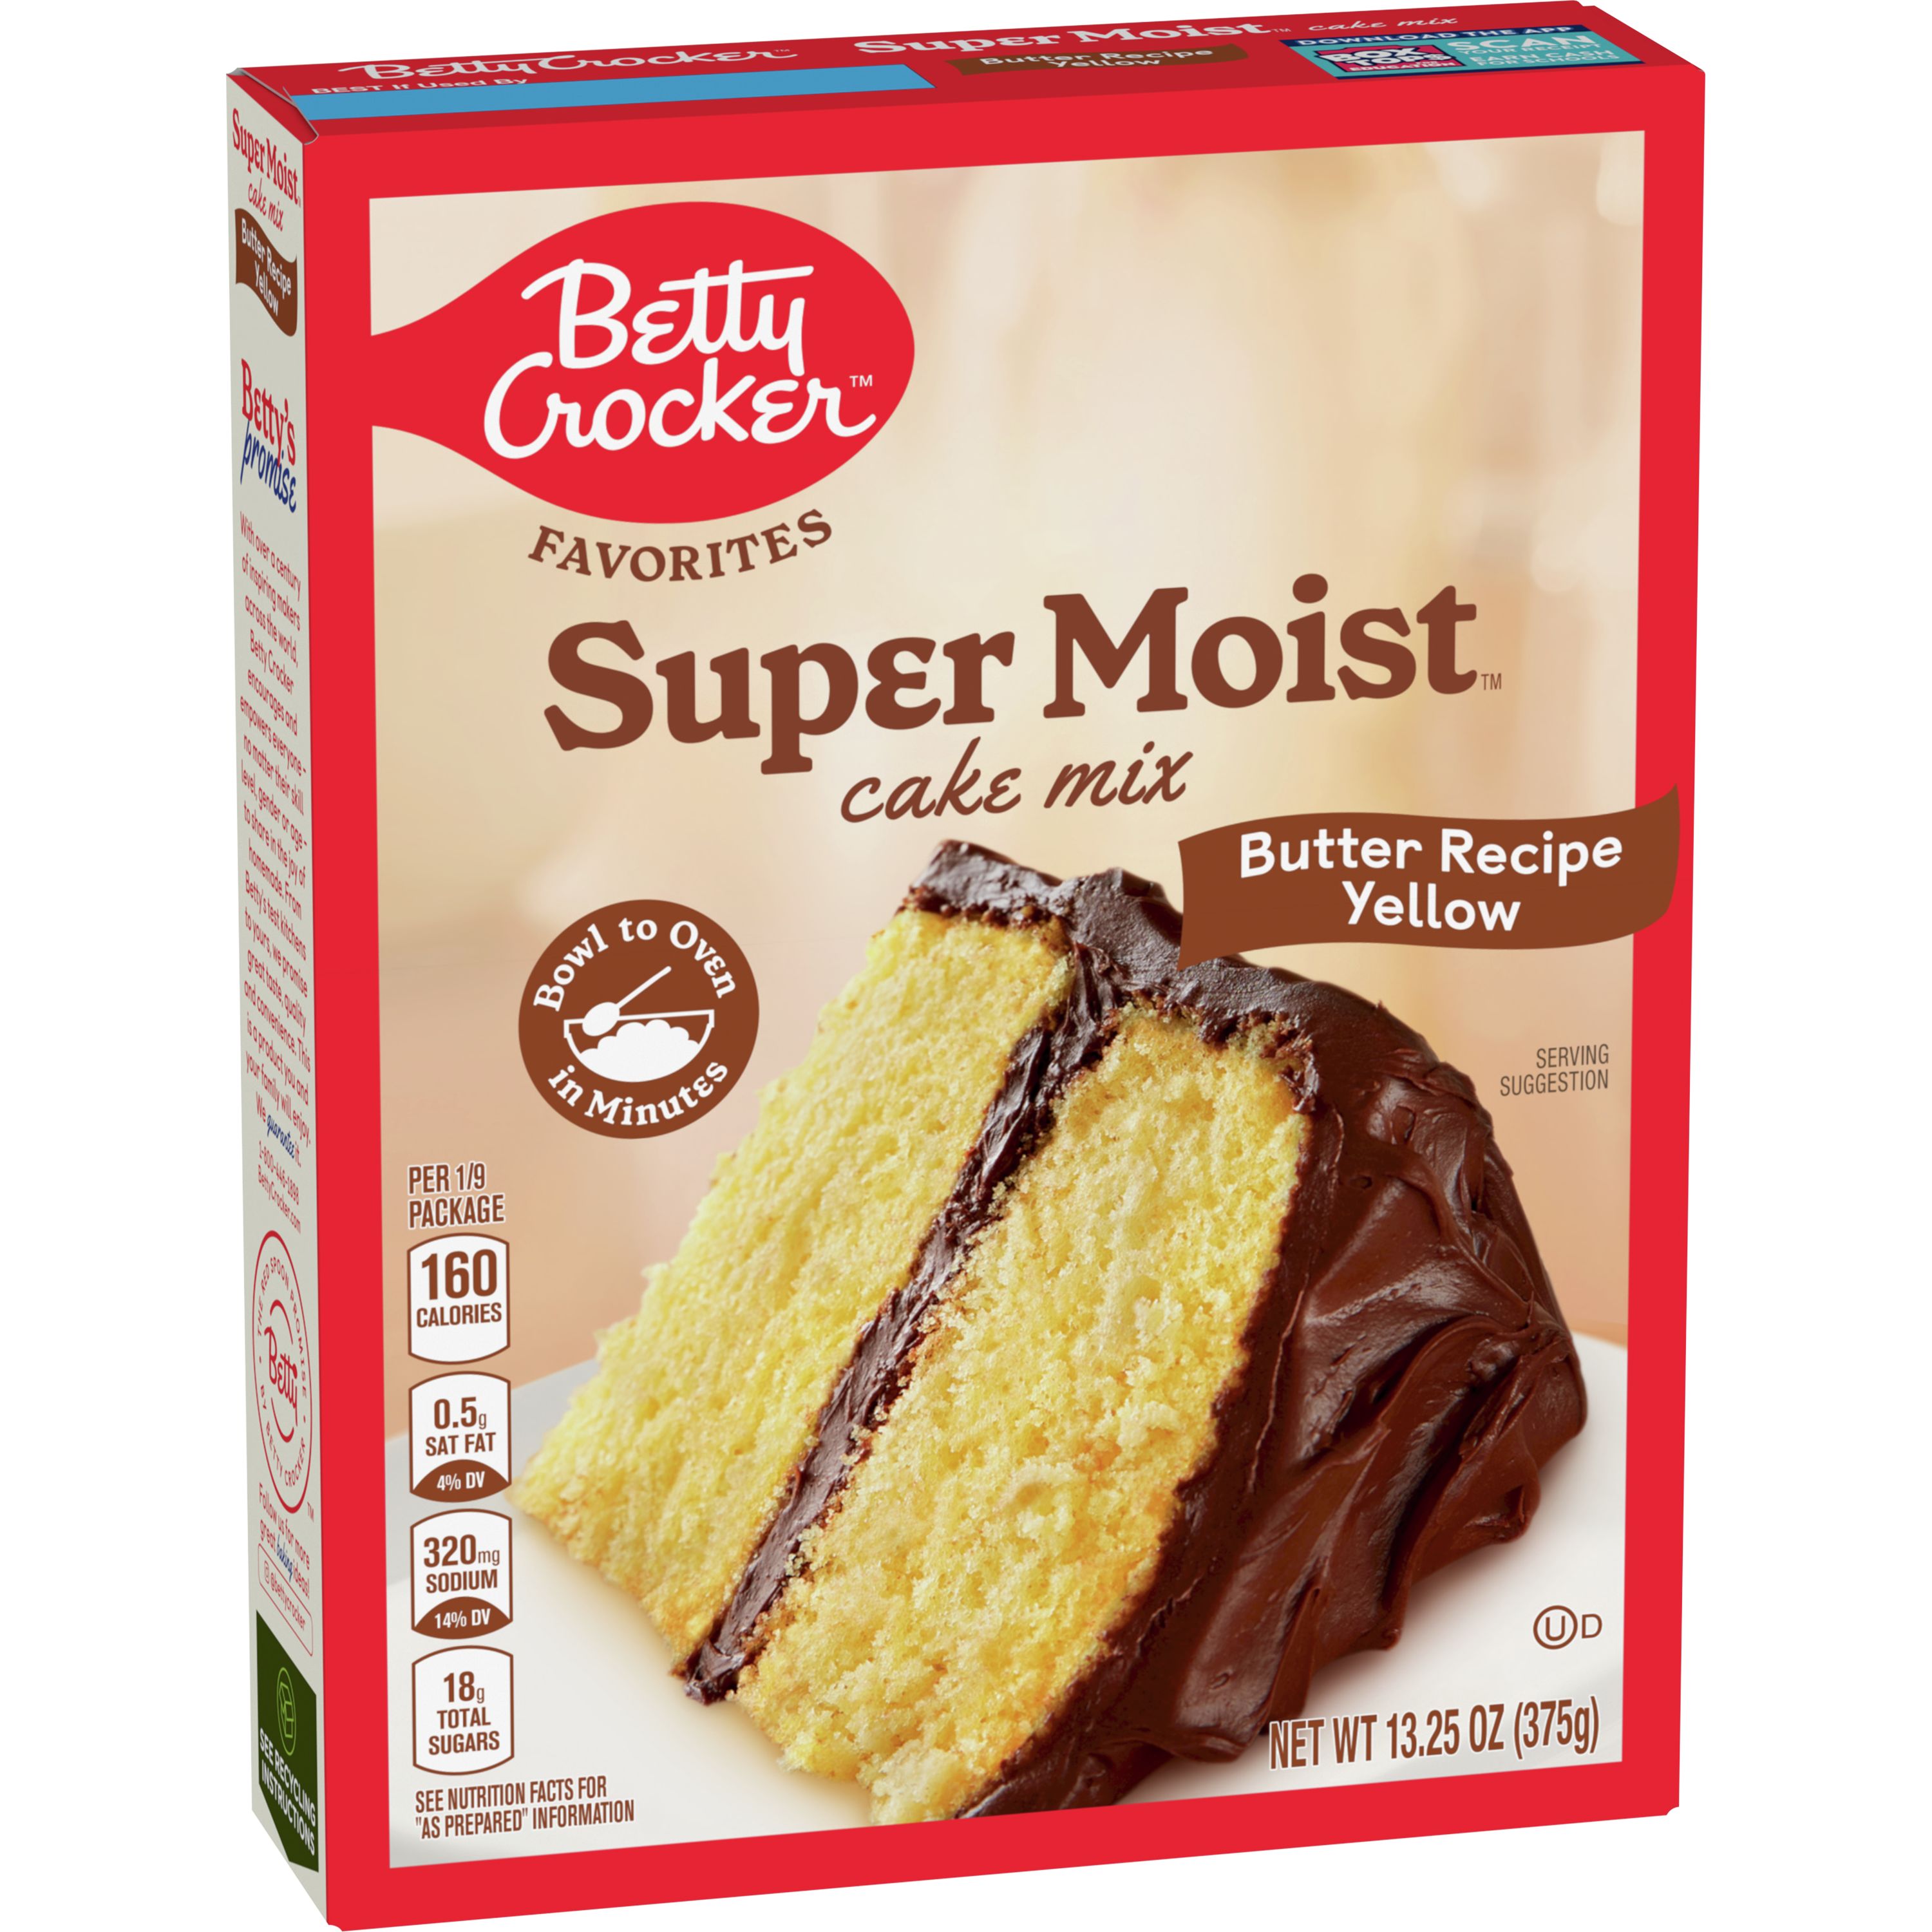 Best boxed cake mix for delicious cakes, according to an expert